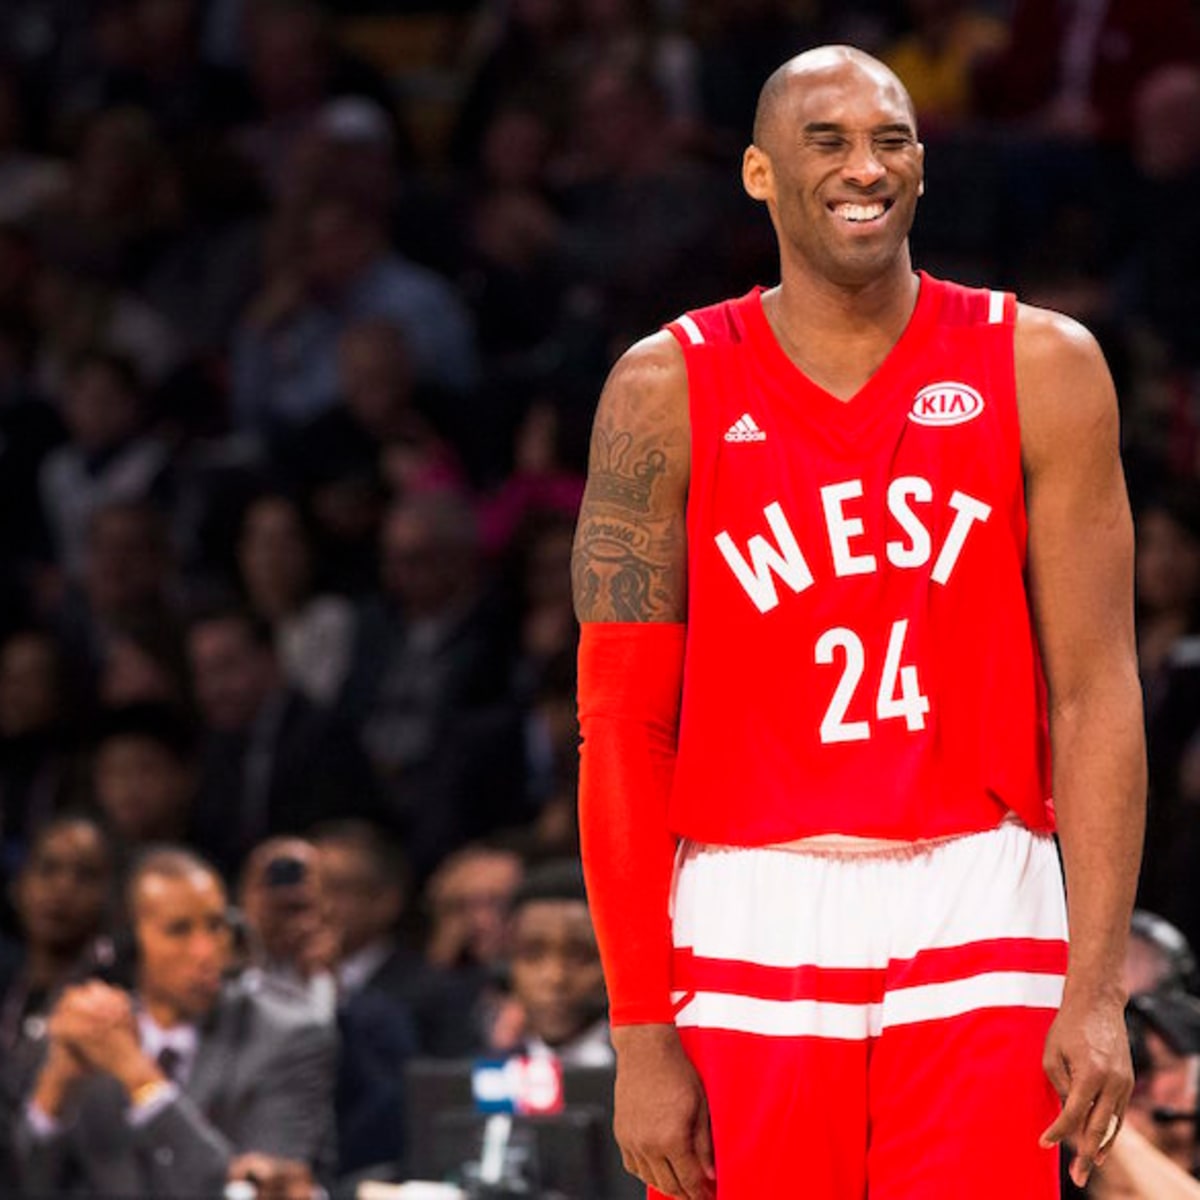 Kobe Bryant's All-Star jersey sells for over $100,000 - Sports Illustrated